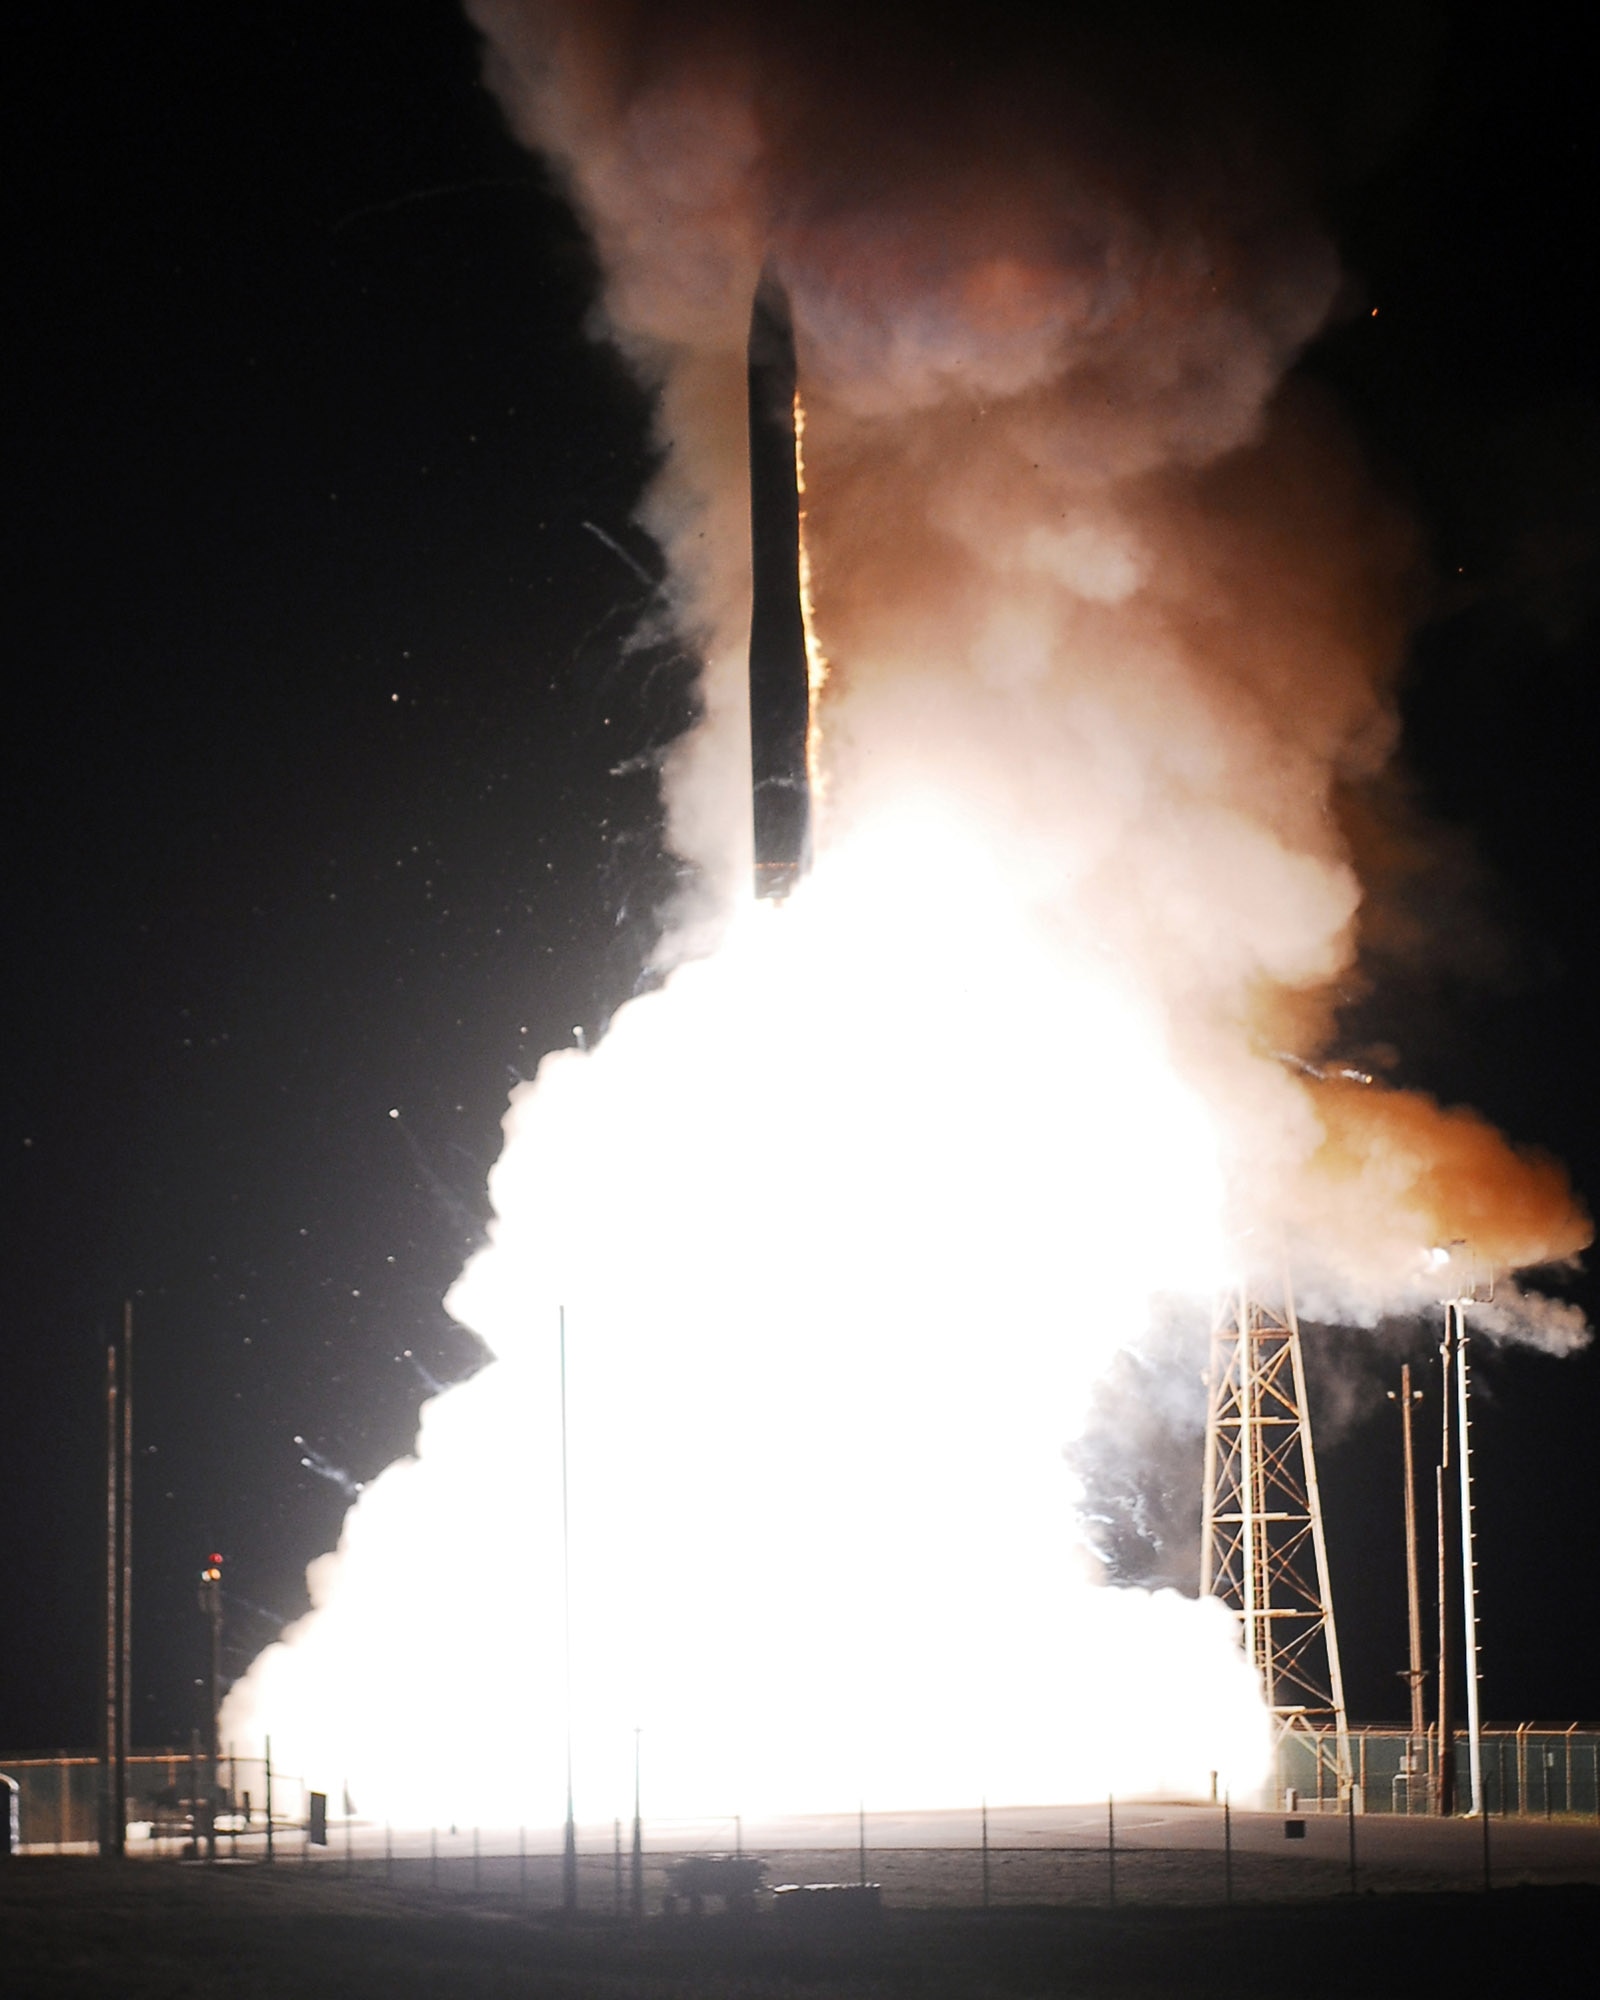 A Minuteman III intercontinental ballistic missile successfully launches at 1 a.m. Nov. 5 from Vandenberg Air Force Base, Calif. The missile was configured with a National Nuclear Security Administration test assembly in which a single unarmed re-entry vehicle traveled approximately 4,190 miles to their pre-determined targets near the Kwajalein Atoll in the Marshall Islands. (U.S. Air Force photo/Joe Davila) 
